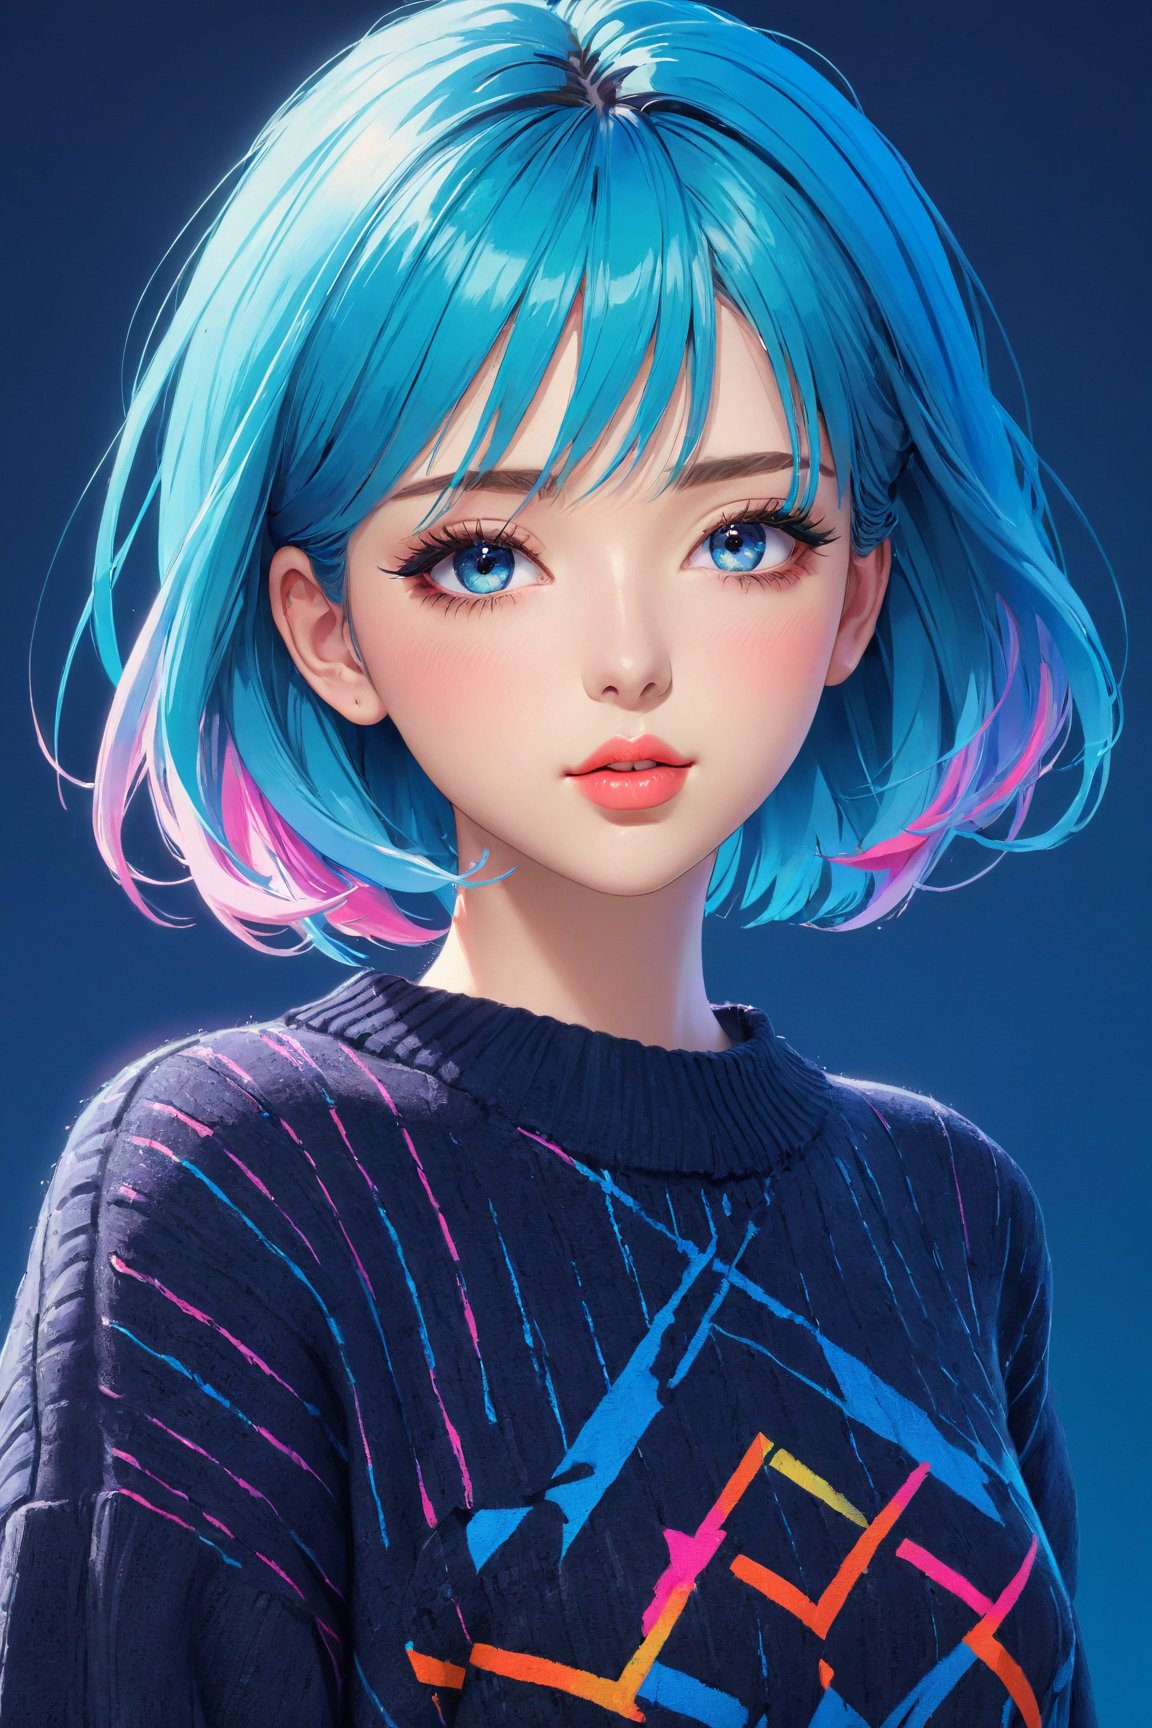 (best quality,realistic,anime:1.2),sketch,lip,beautiful detailed eyes,beautiful detailed lips,extremely detailed eyes and face,long eyelashes,strong expressions,soft touch,expressive poses,1girl,modern outfit,stylish clothes,neon hair,3D rendering,artistic brushstrokes,clean lines,vibrant colors,contrast,highlights,shadows,blue gradient background,texture,embroidered sweater,chic style,dynamic composition,interesting angle,textured crop,fashionable,cool vibes